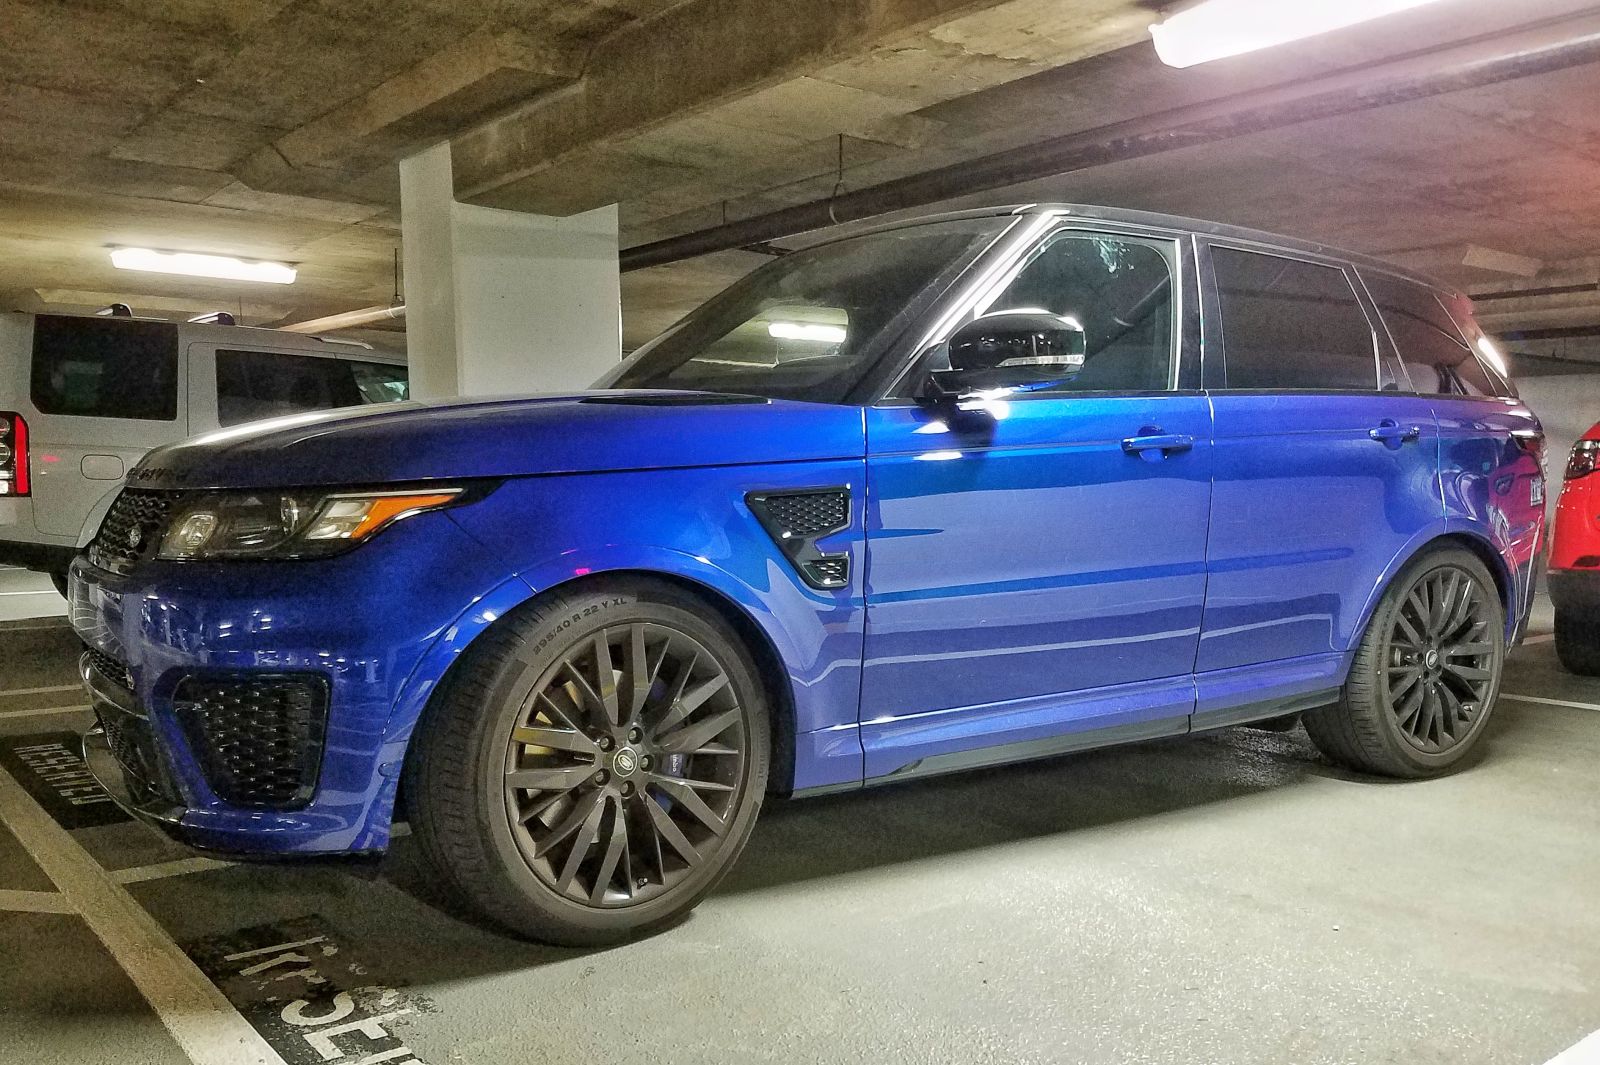 Illustration for article titled The Range Rover Sport SVR has magical parking superpowers